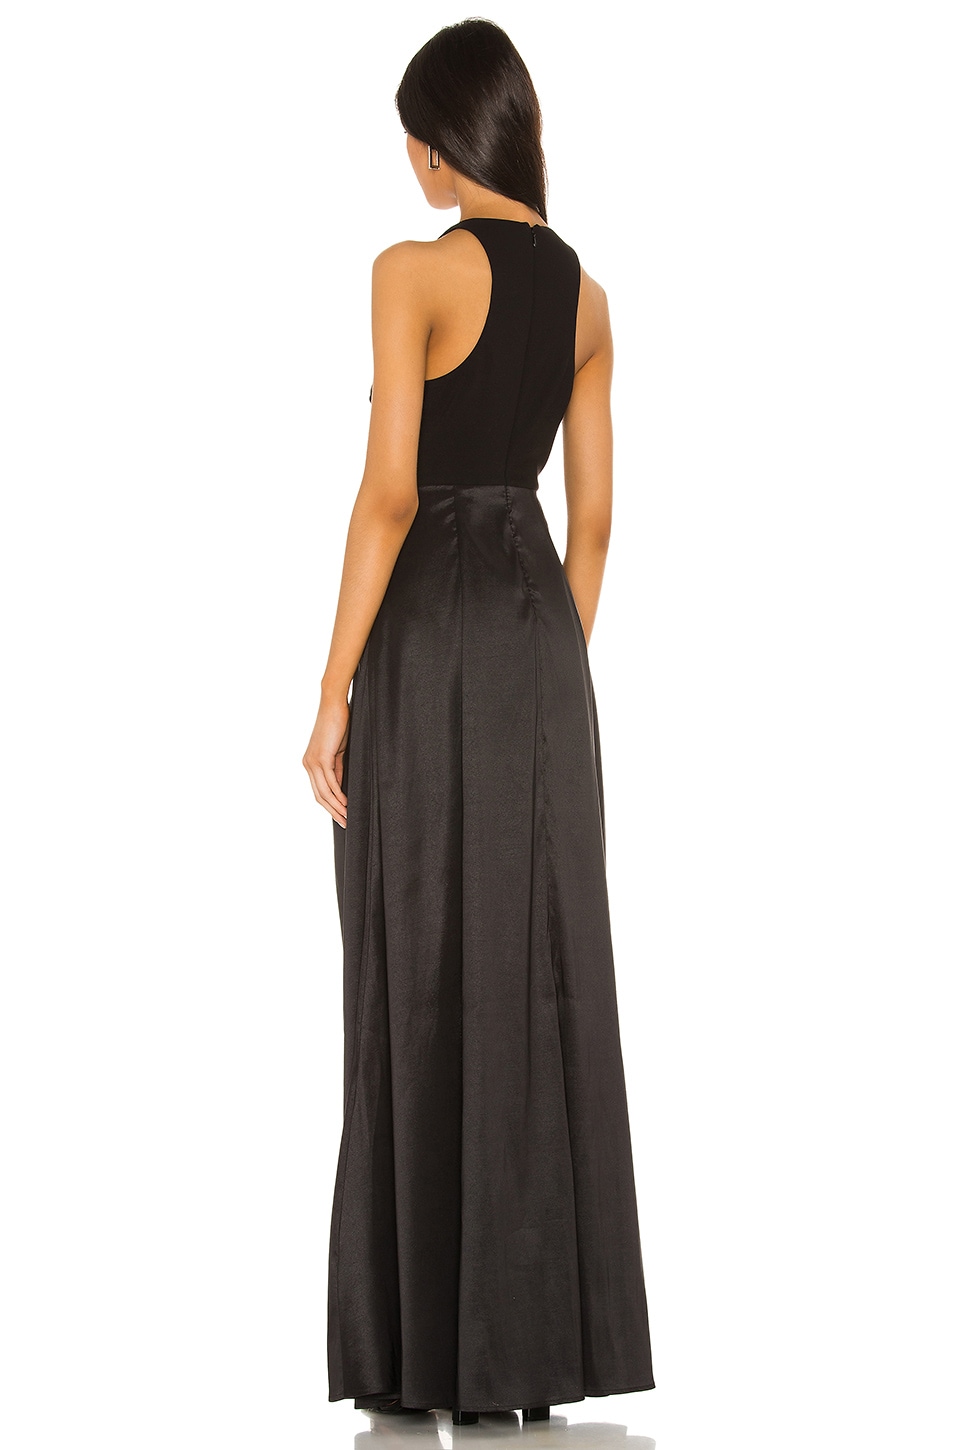 LIKELY Mena Gown in Black | REVOLVE